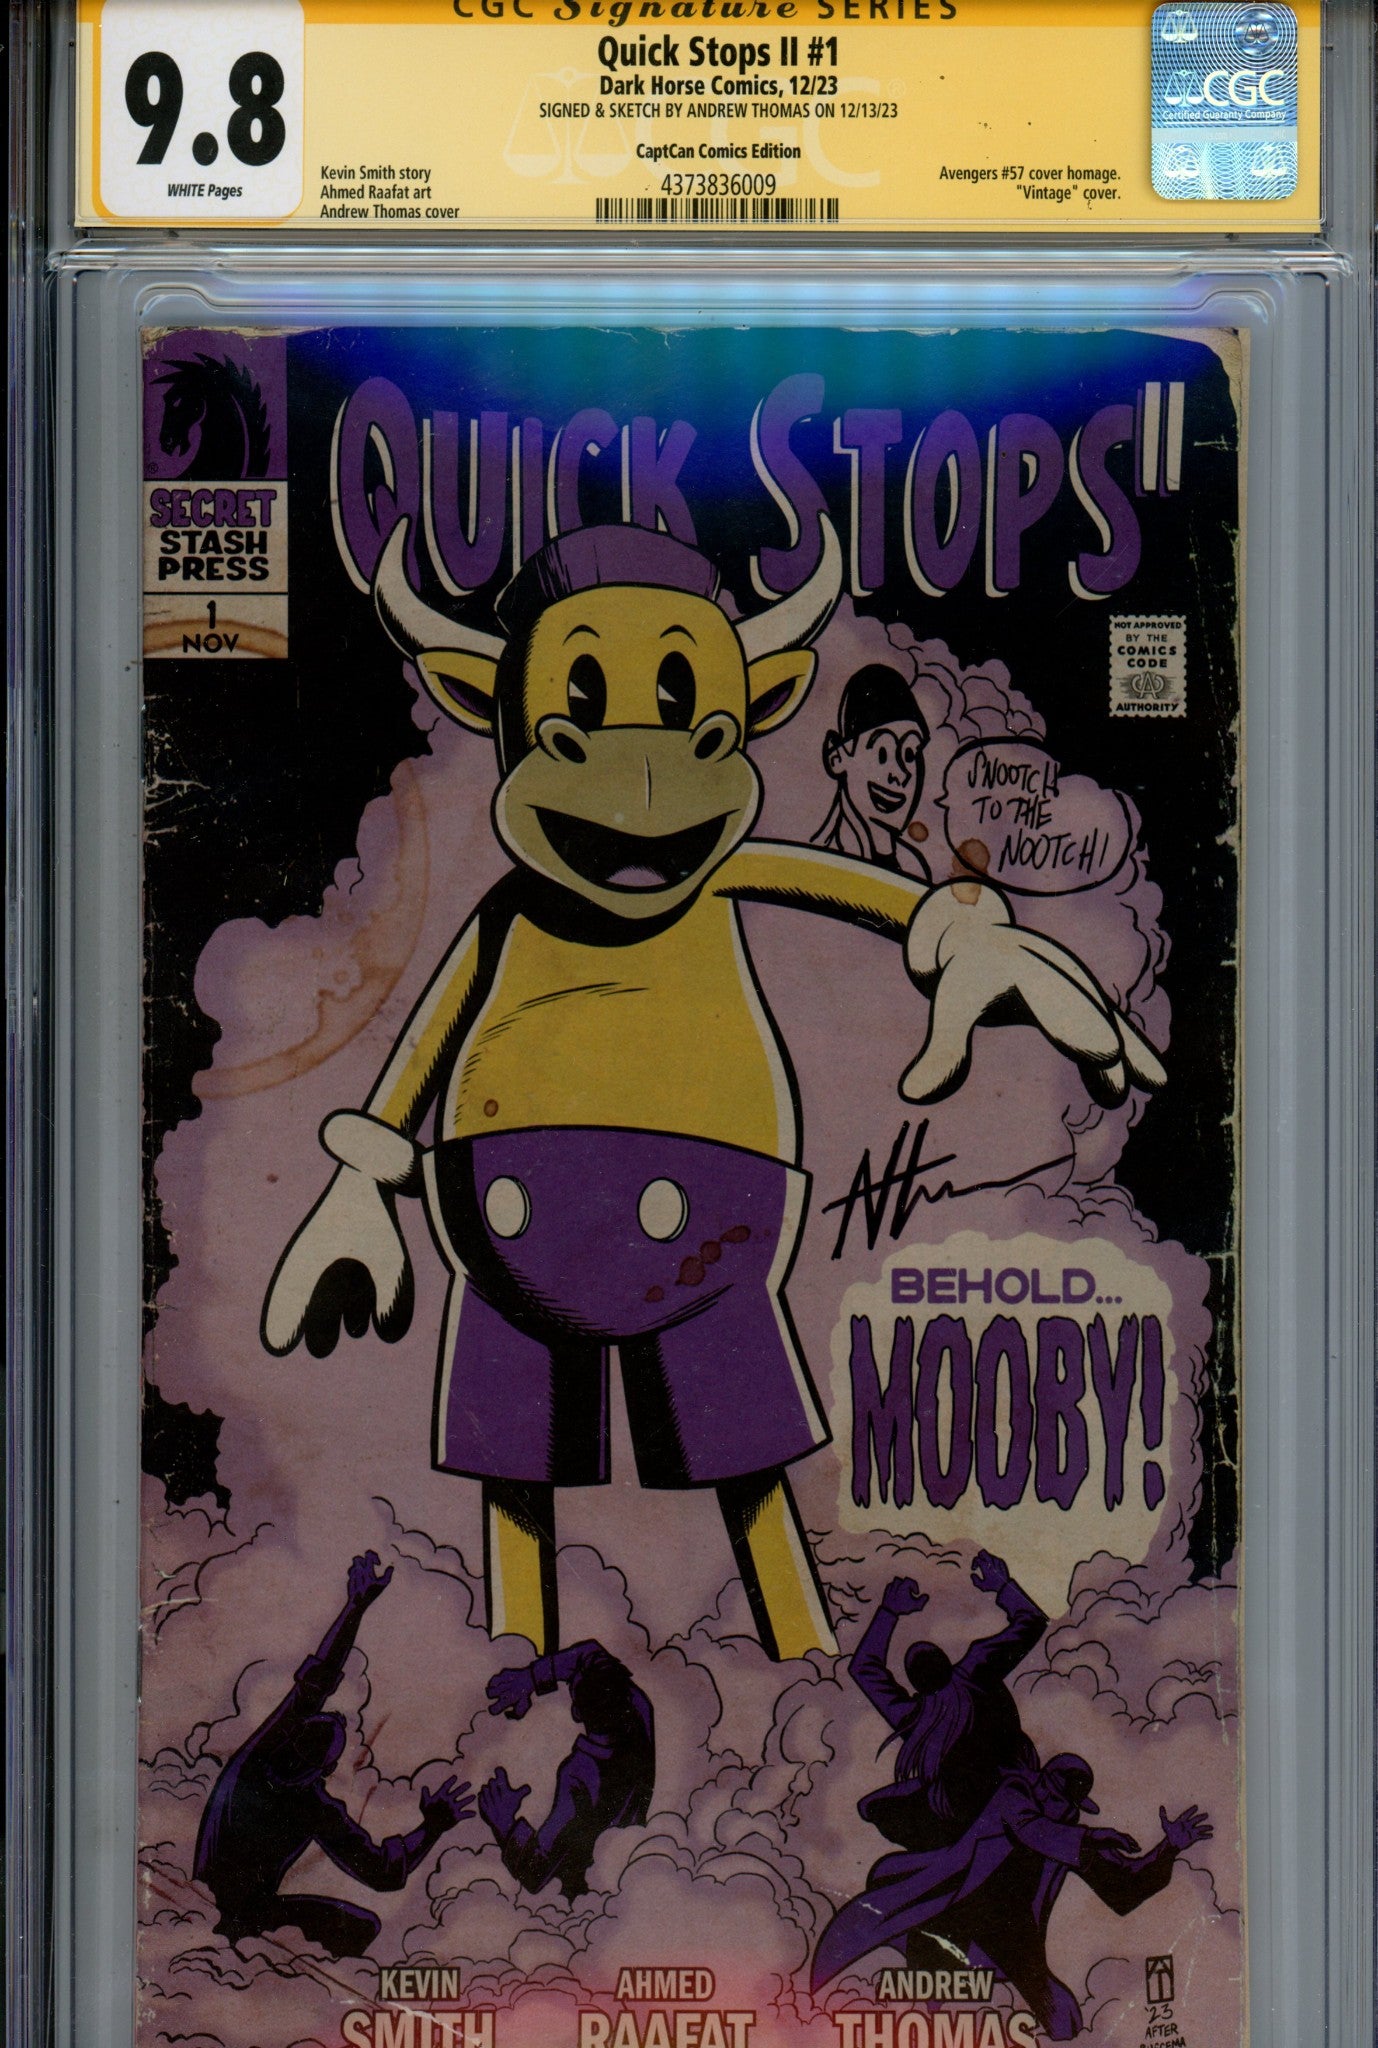 Quick Stops II 1 CGC 9.8 (NM/M) Jay Sketch (2023) Thomas Homage Exclusive Variant Signed / Remarked x1 Cover Andrew Thomas 